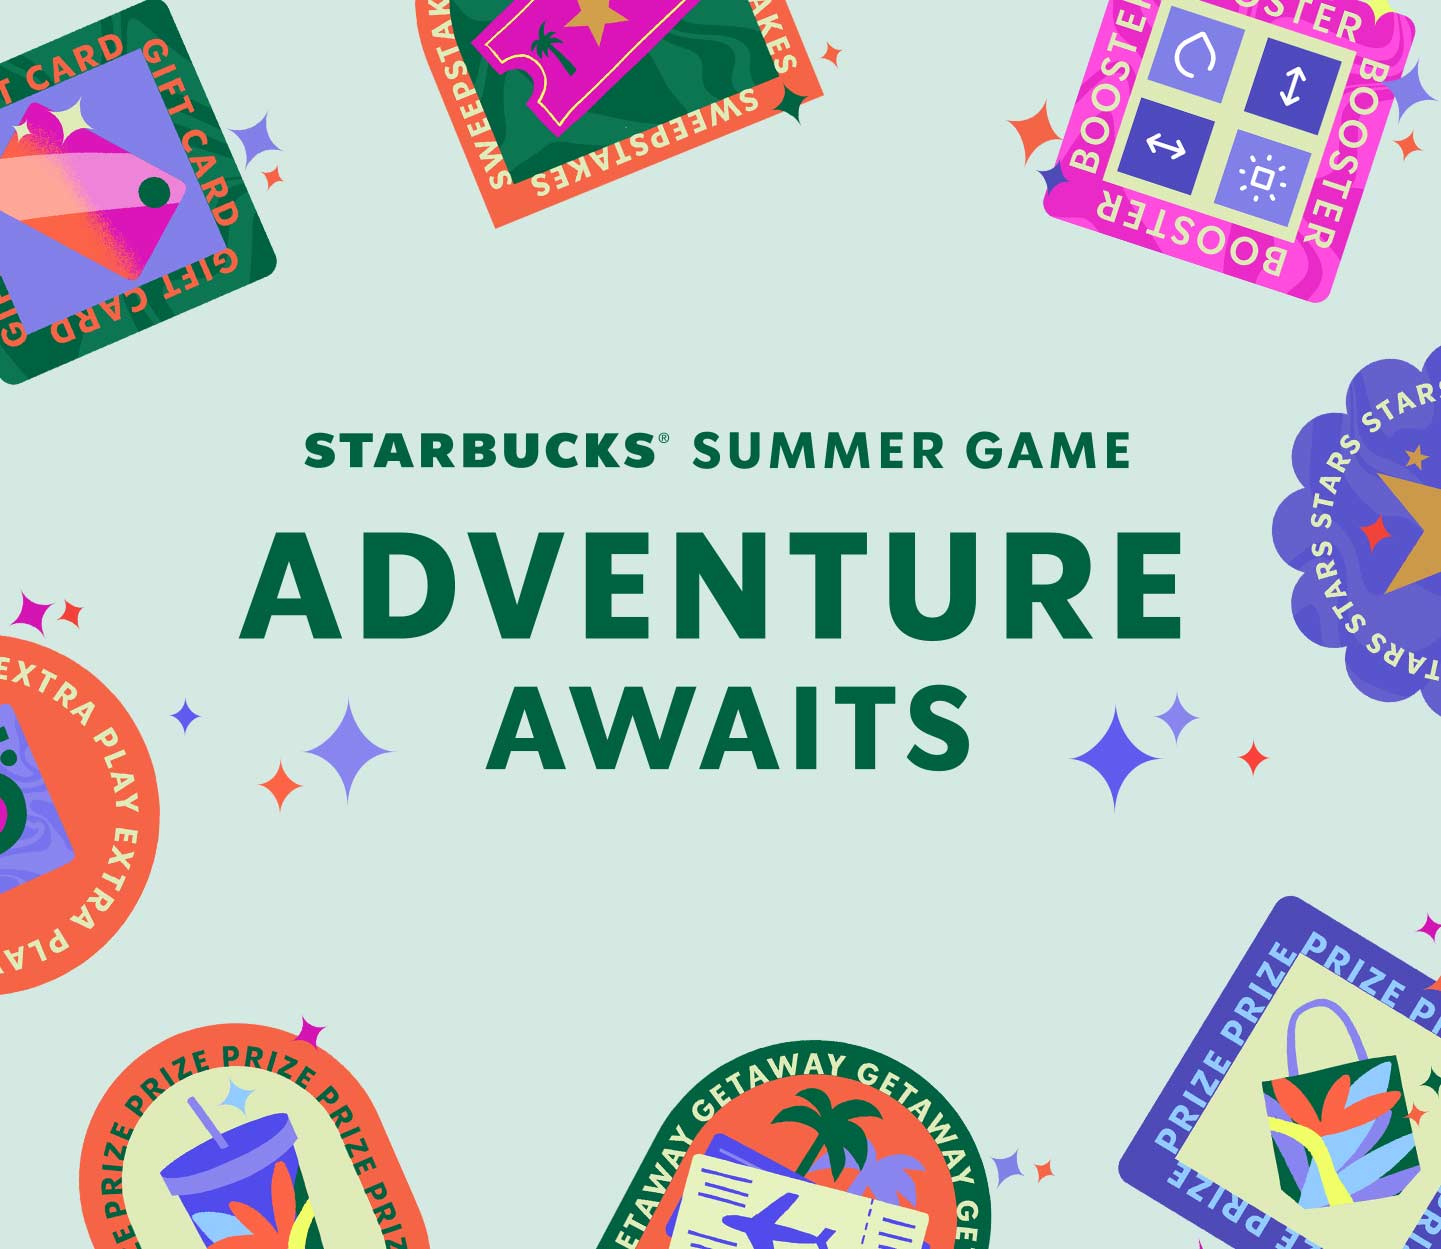 The text “Starbucks® Summer Game: Adventure Awaits” on a mint background surrounded by badges.